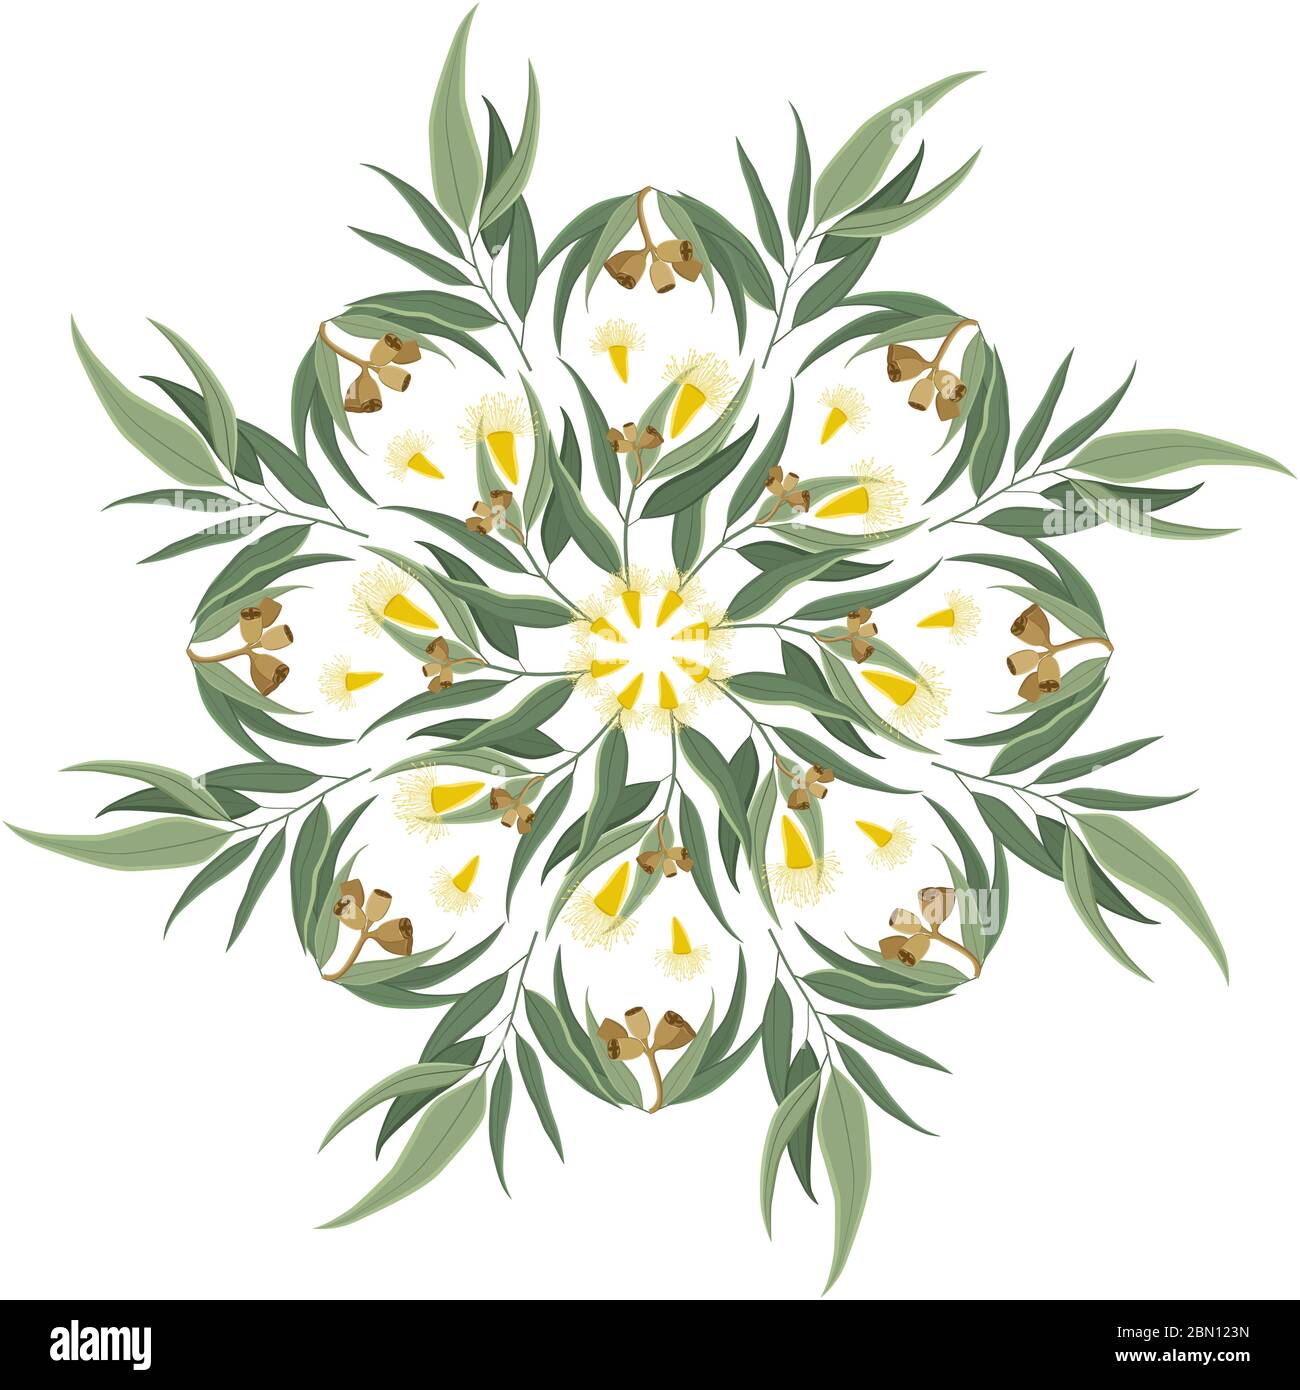 Abstract round ornament, mandala with eucalyptus leaves, seeds and flowers. Circular floral motif, pattern isolated on white background Stock Vector